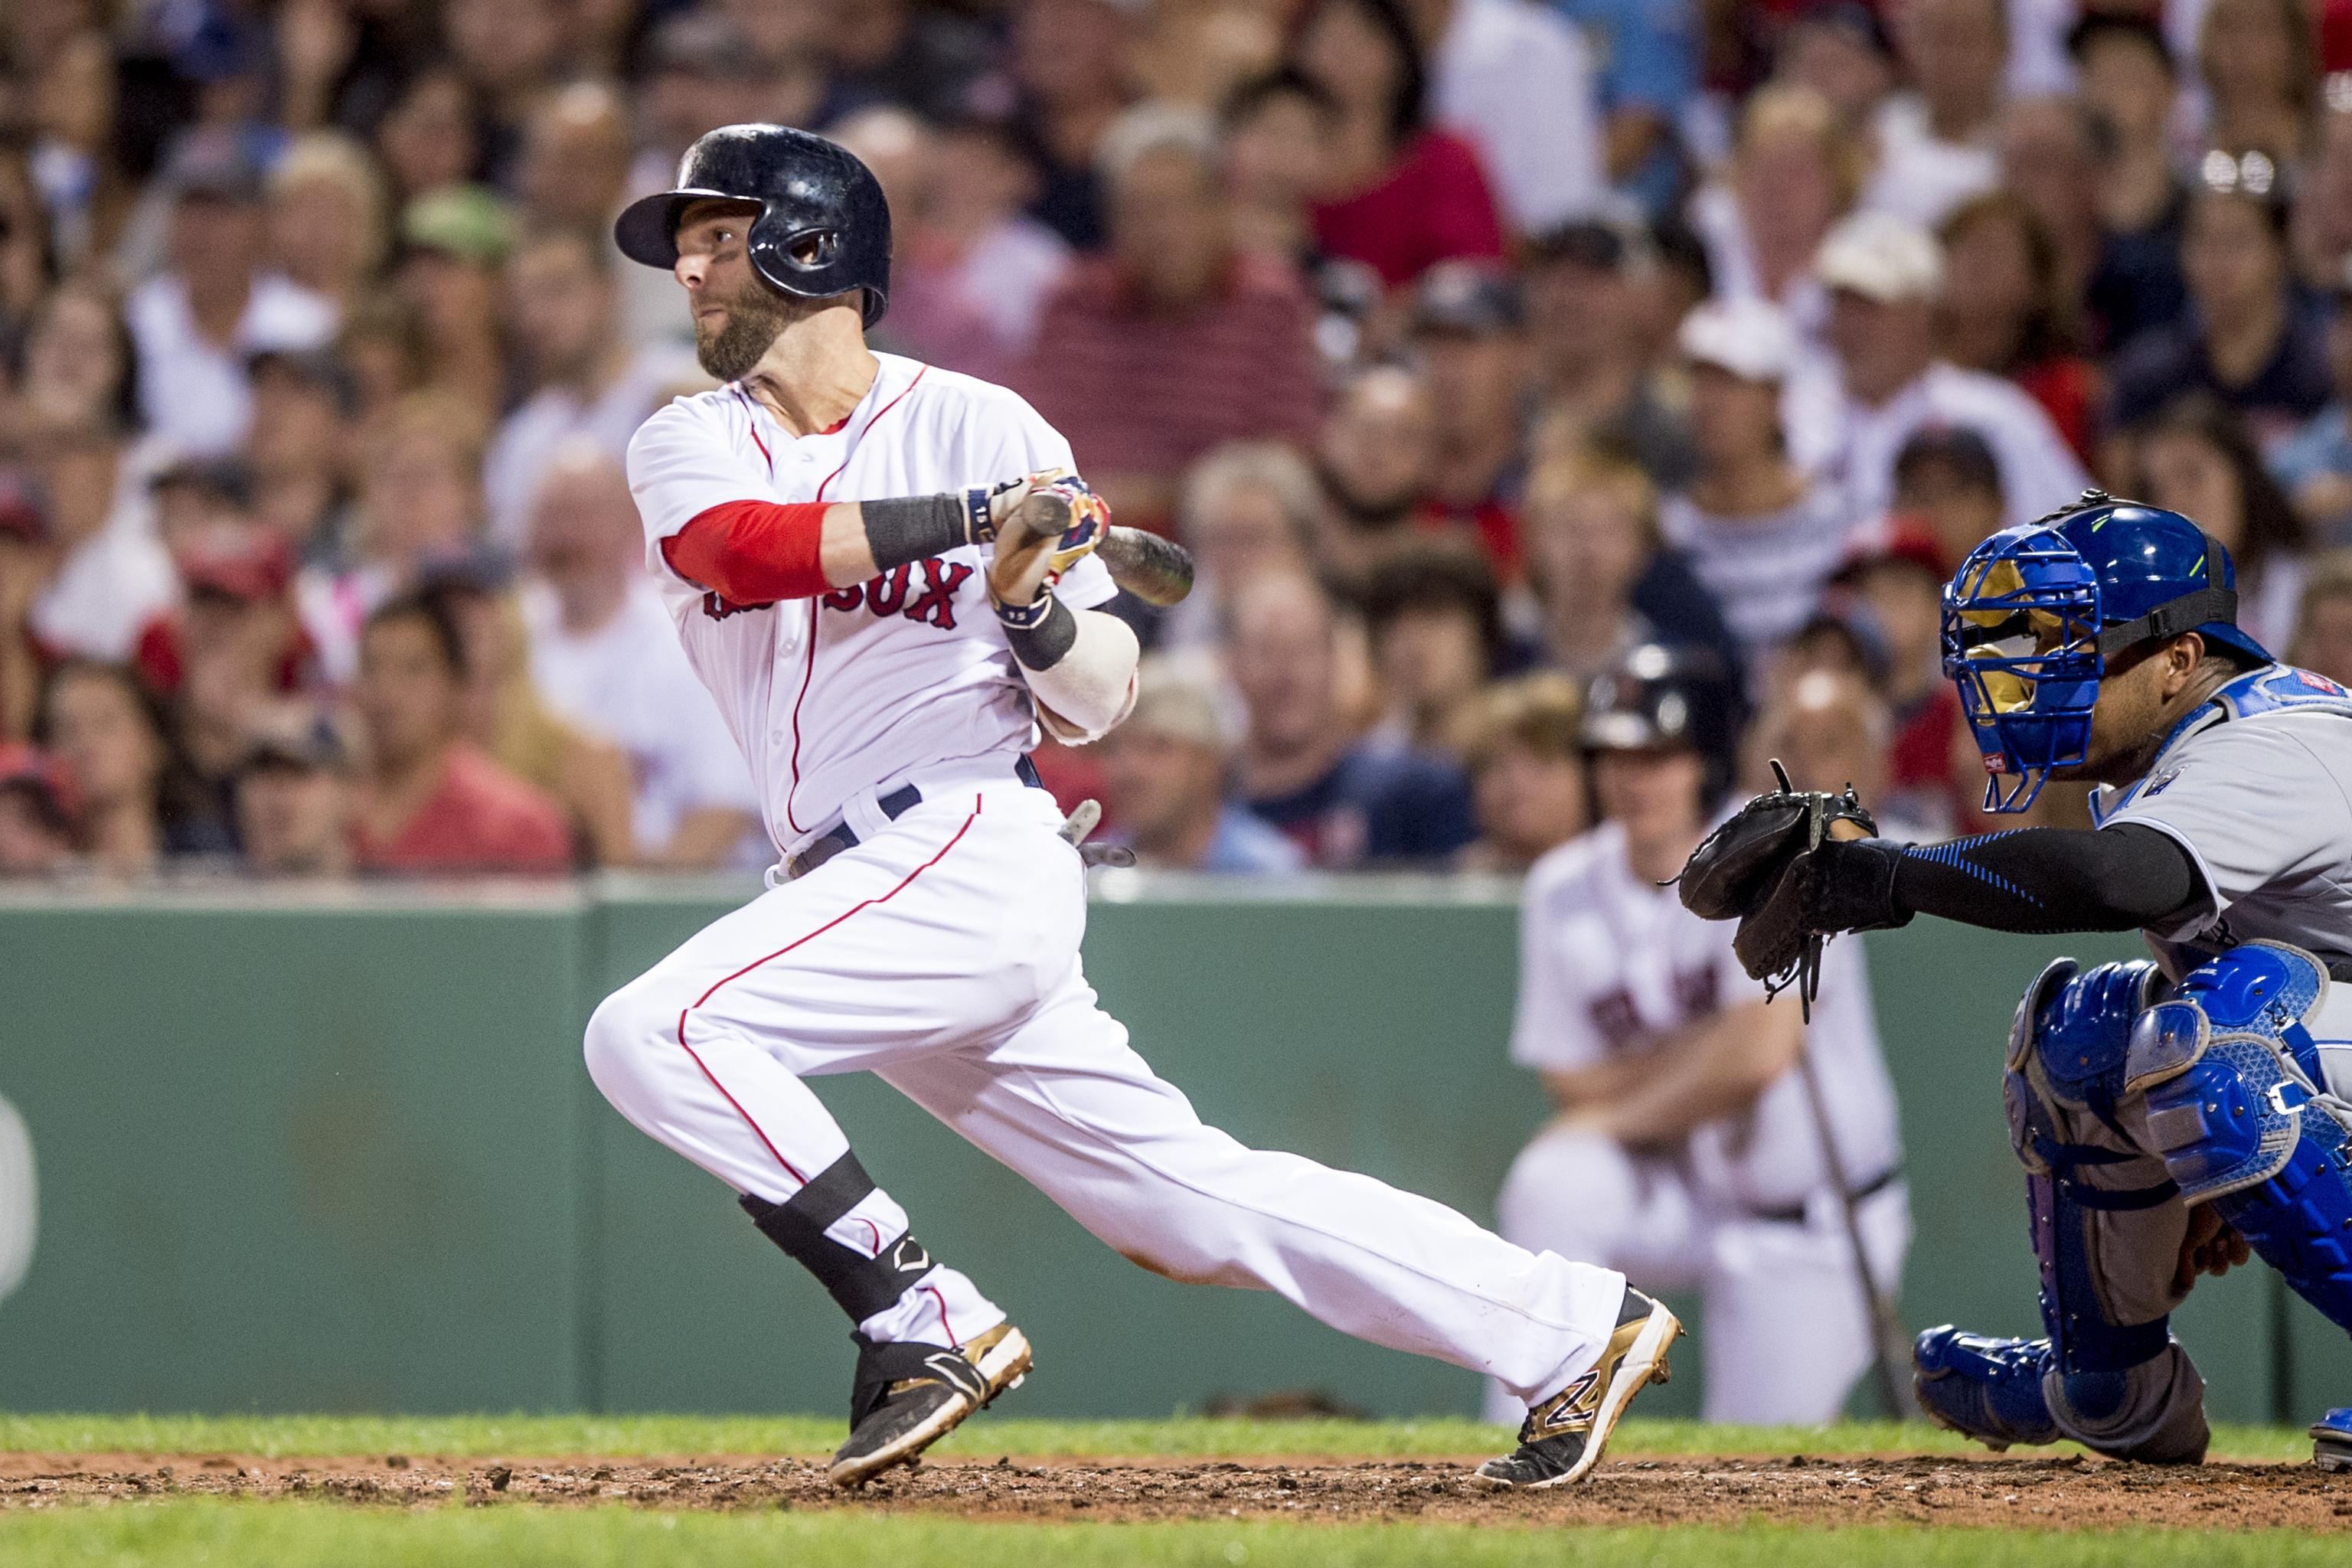 Dustin Pedroia Has Become Forgotten Star in Red Sox's Booming